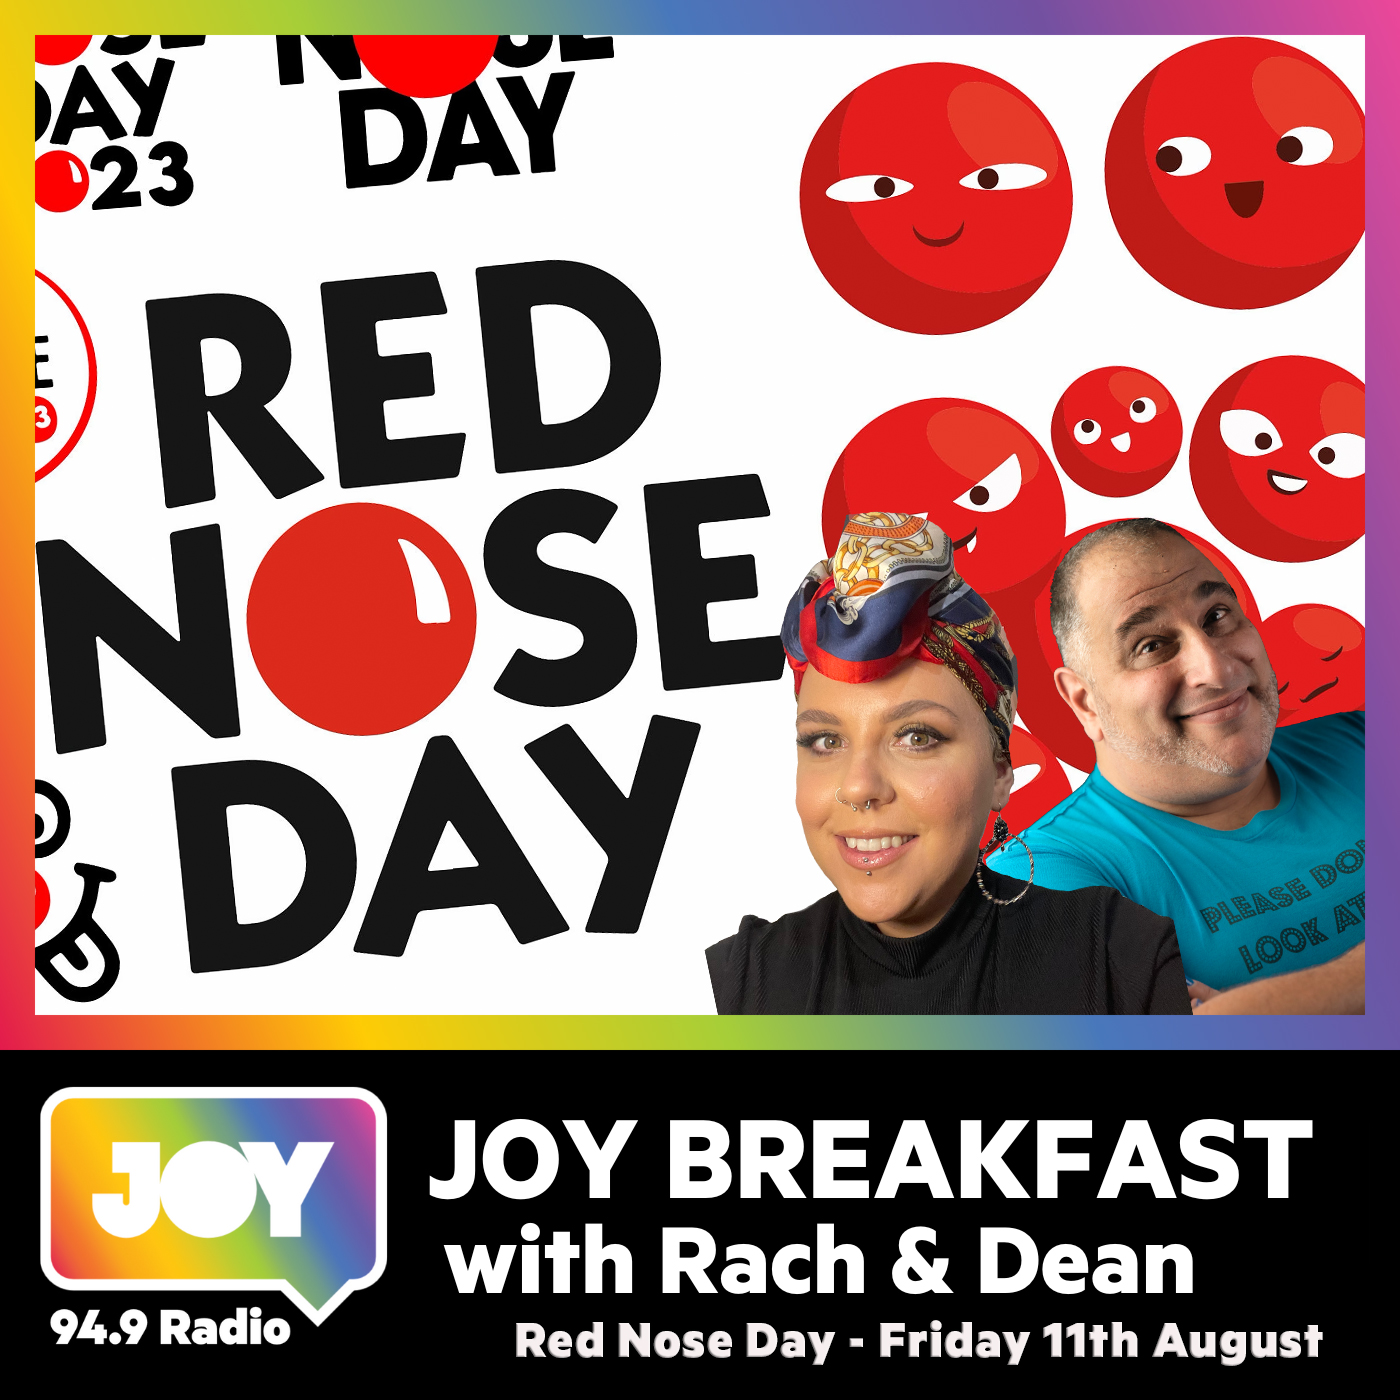 Yen & Gemma share their first-hand understanding of the support Red Nose Day provides